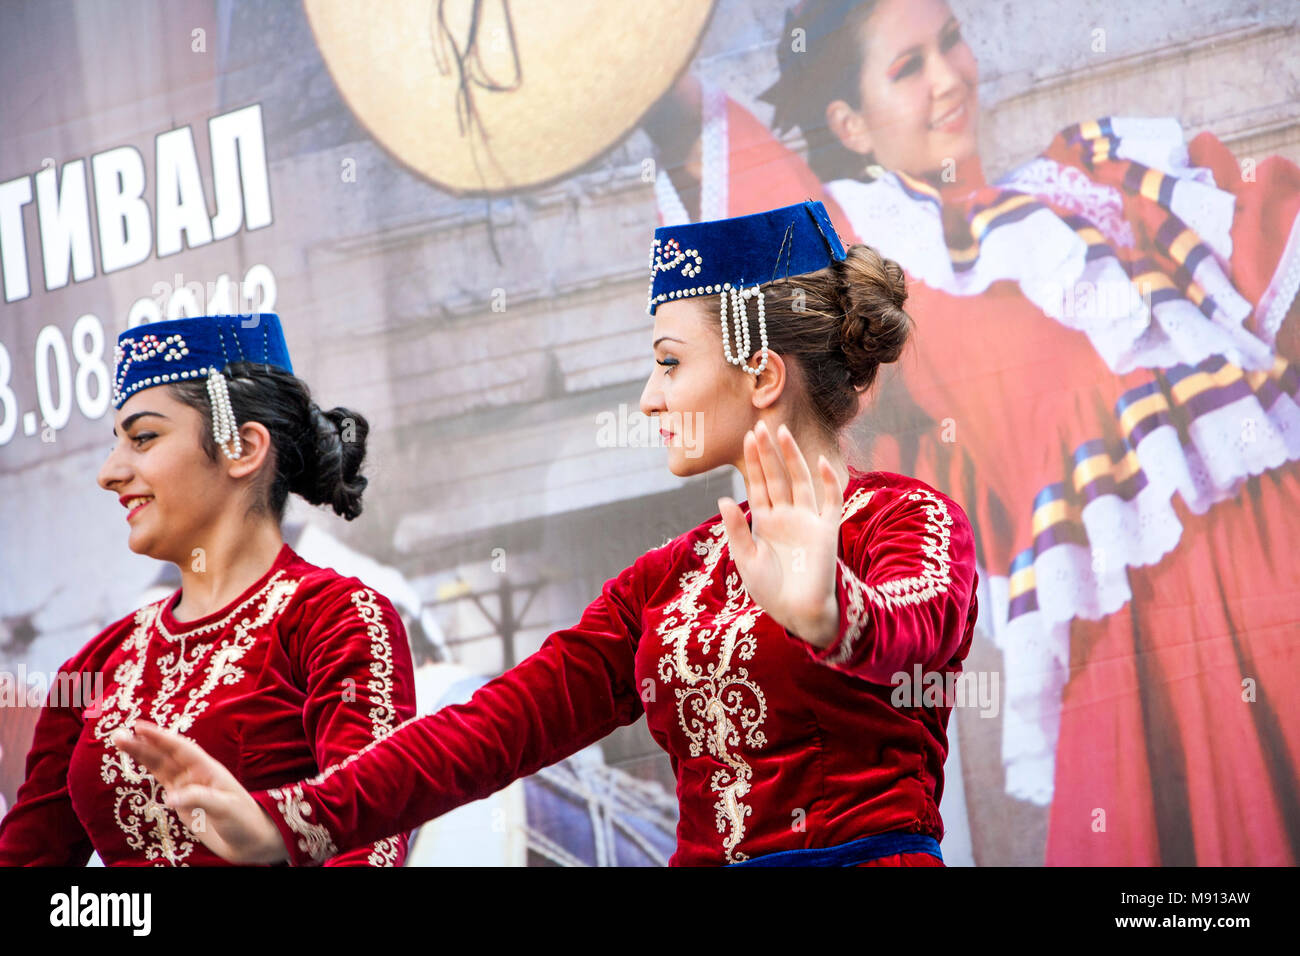 Plovdiv, Bulgaria - 3rd August 2013: Two Armenian girls in folklore costumes are performing on stage of the XIX International Folklore Festival Stock Photo